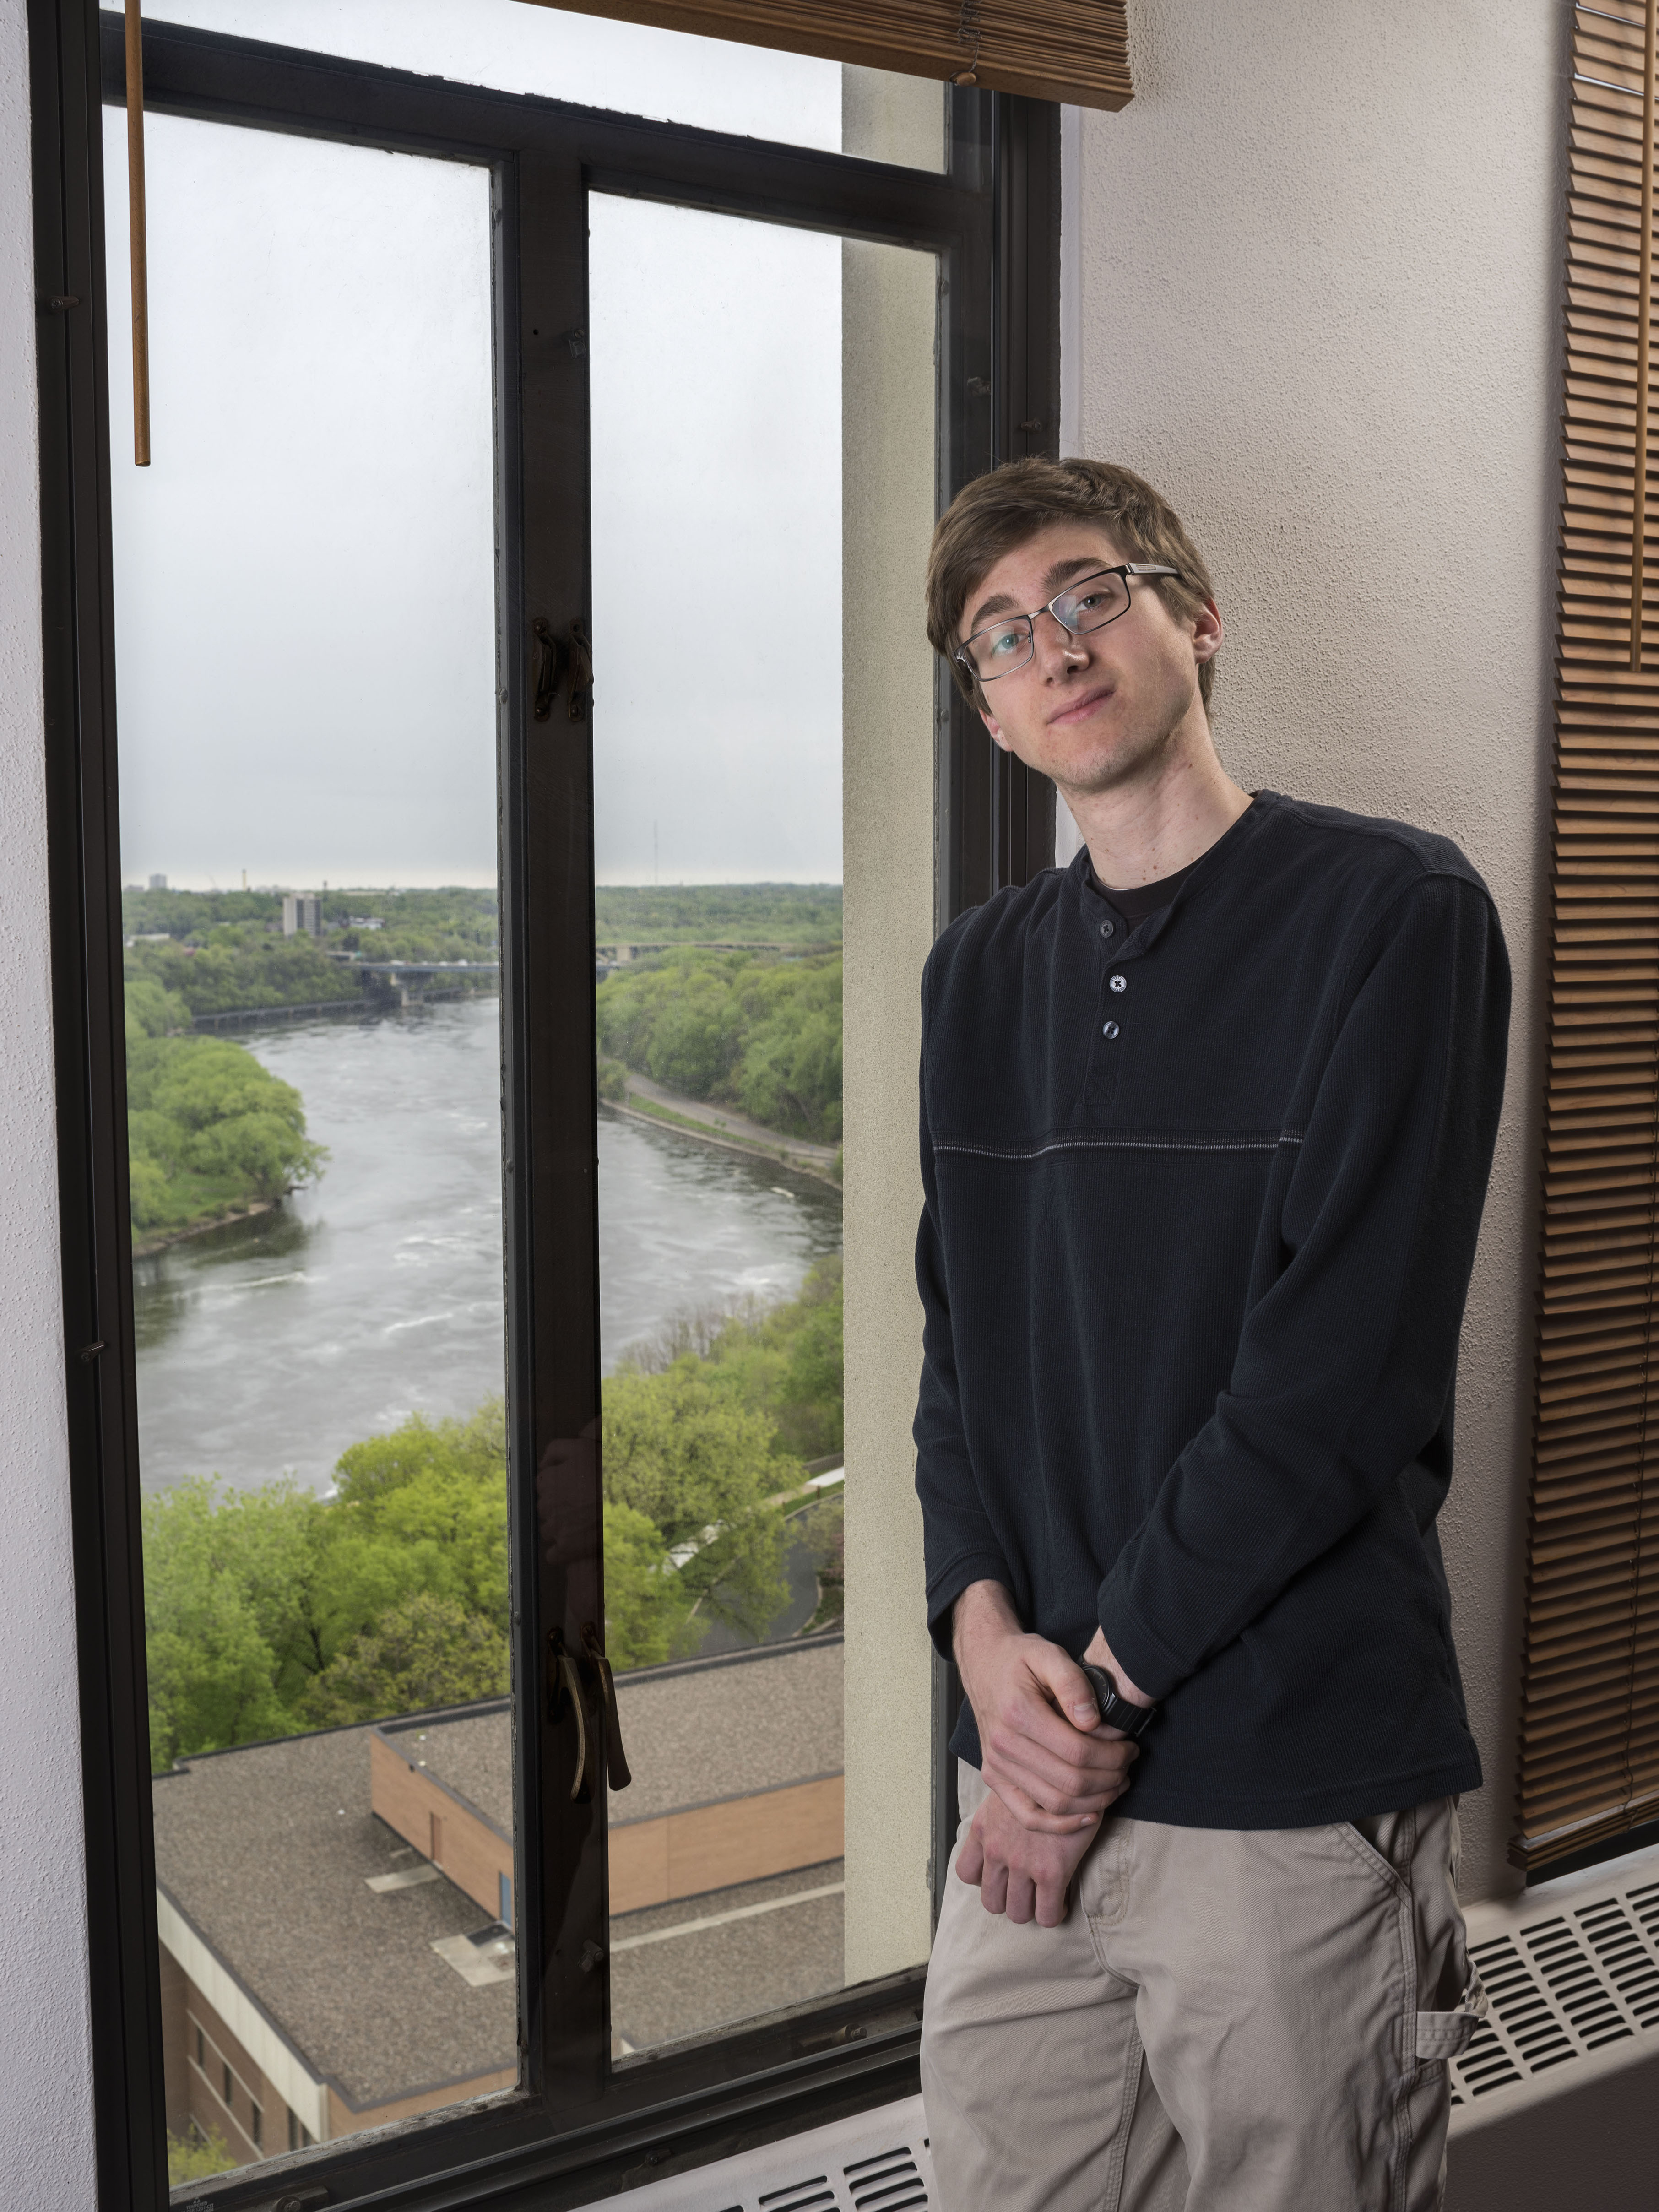 A student leans against a window that overlooks the Mississippi river.